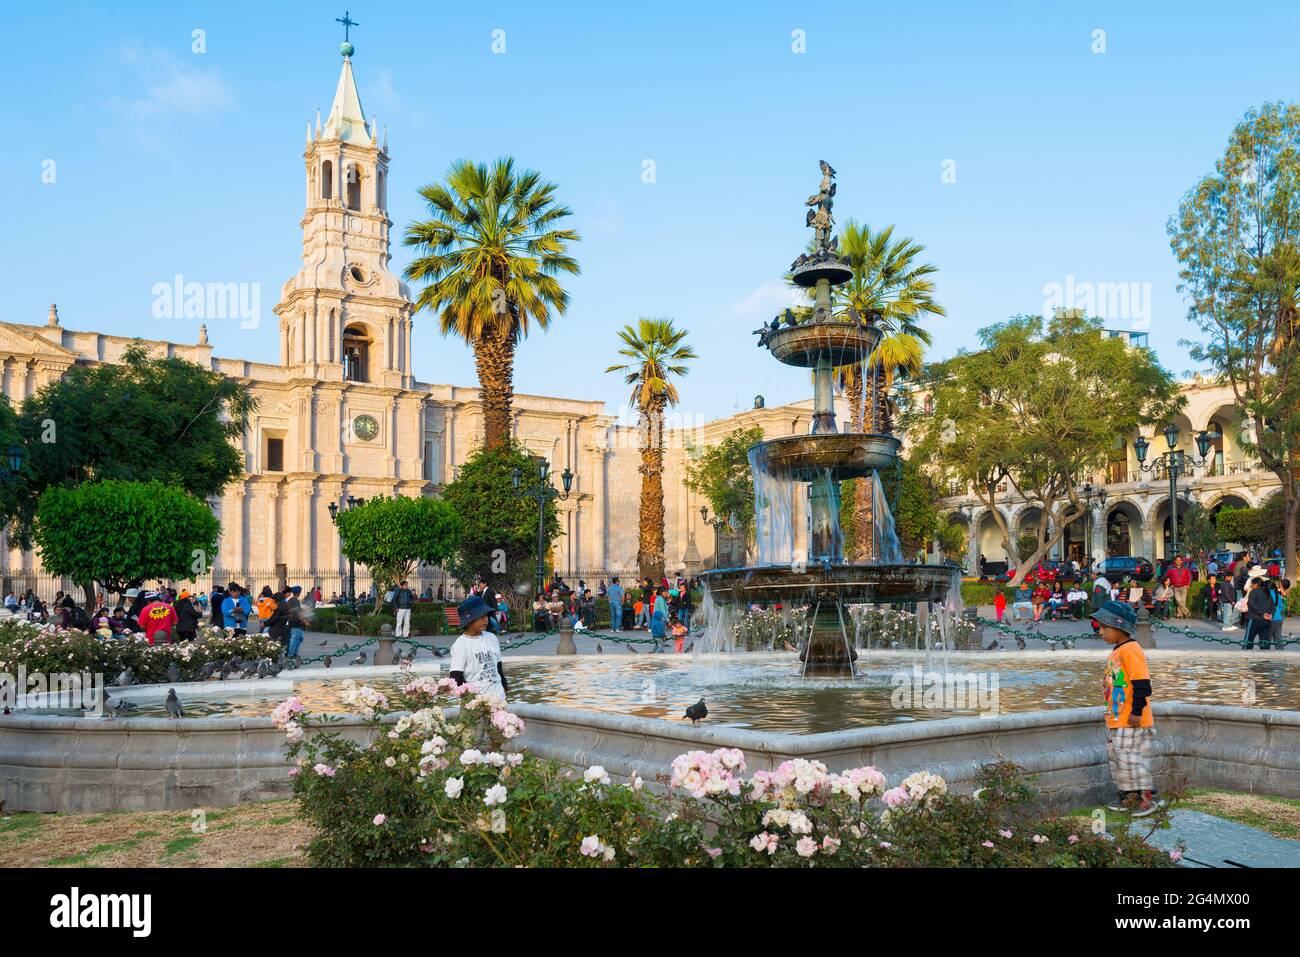 Arequipa, Provincia de Arequipa, Peru - People at the main Plaza with the cathedral Catedral basilica de Arequipa. Stock Photo